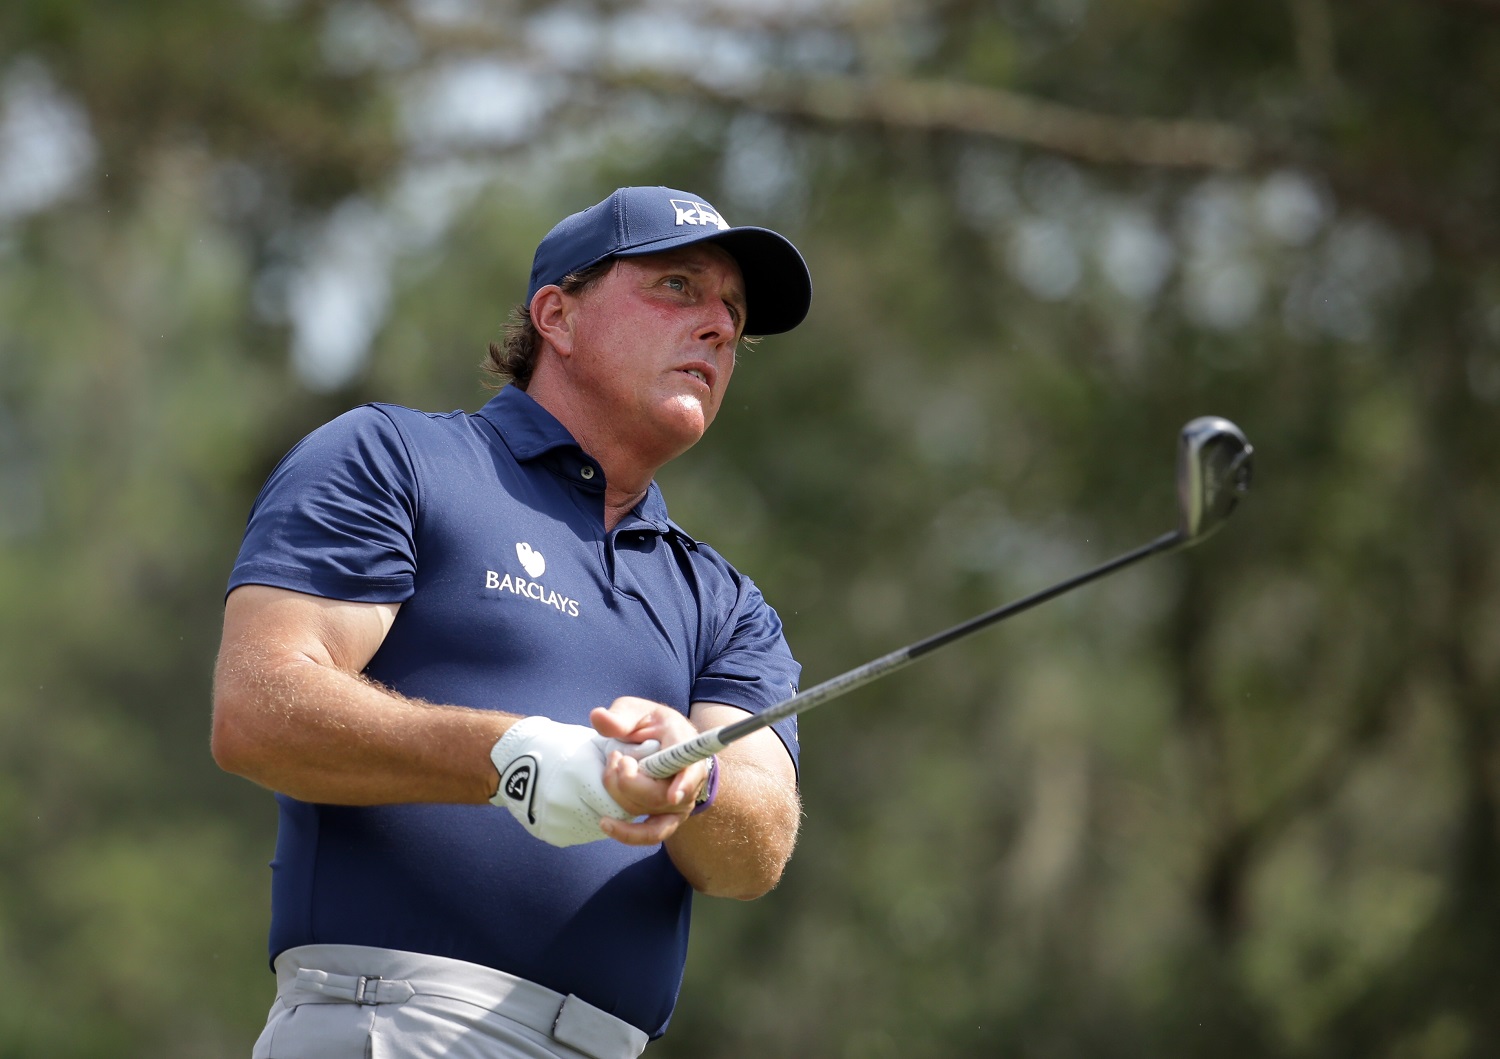 Phil Mickelson follows his shot from the ninth tee during the second round of The Players Championship golf tournament Friday, May 13, 2016, in Ponte Vedra Beach, Fla. (AP Photo/Lynne Sladky)